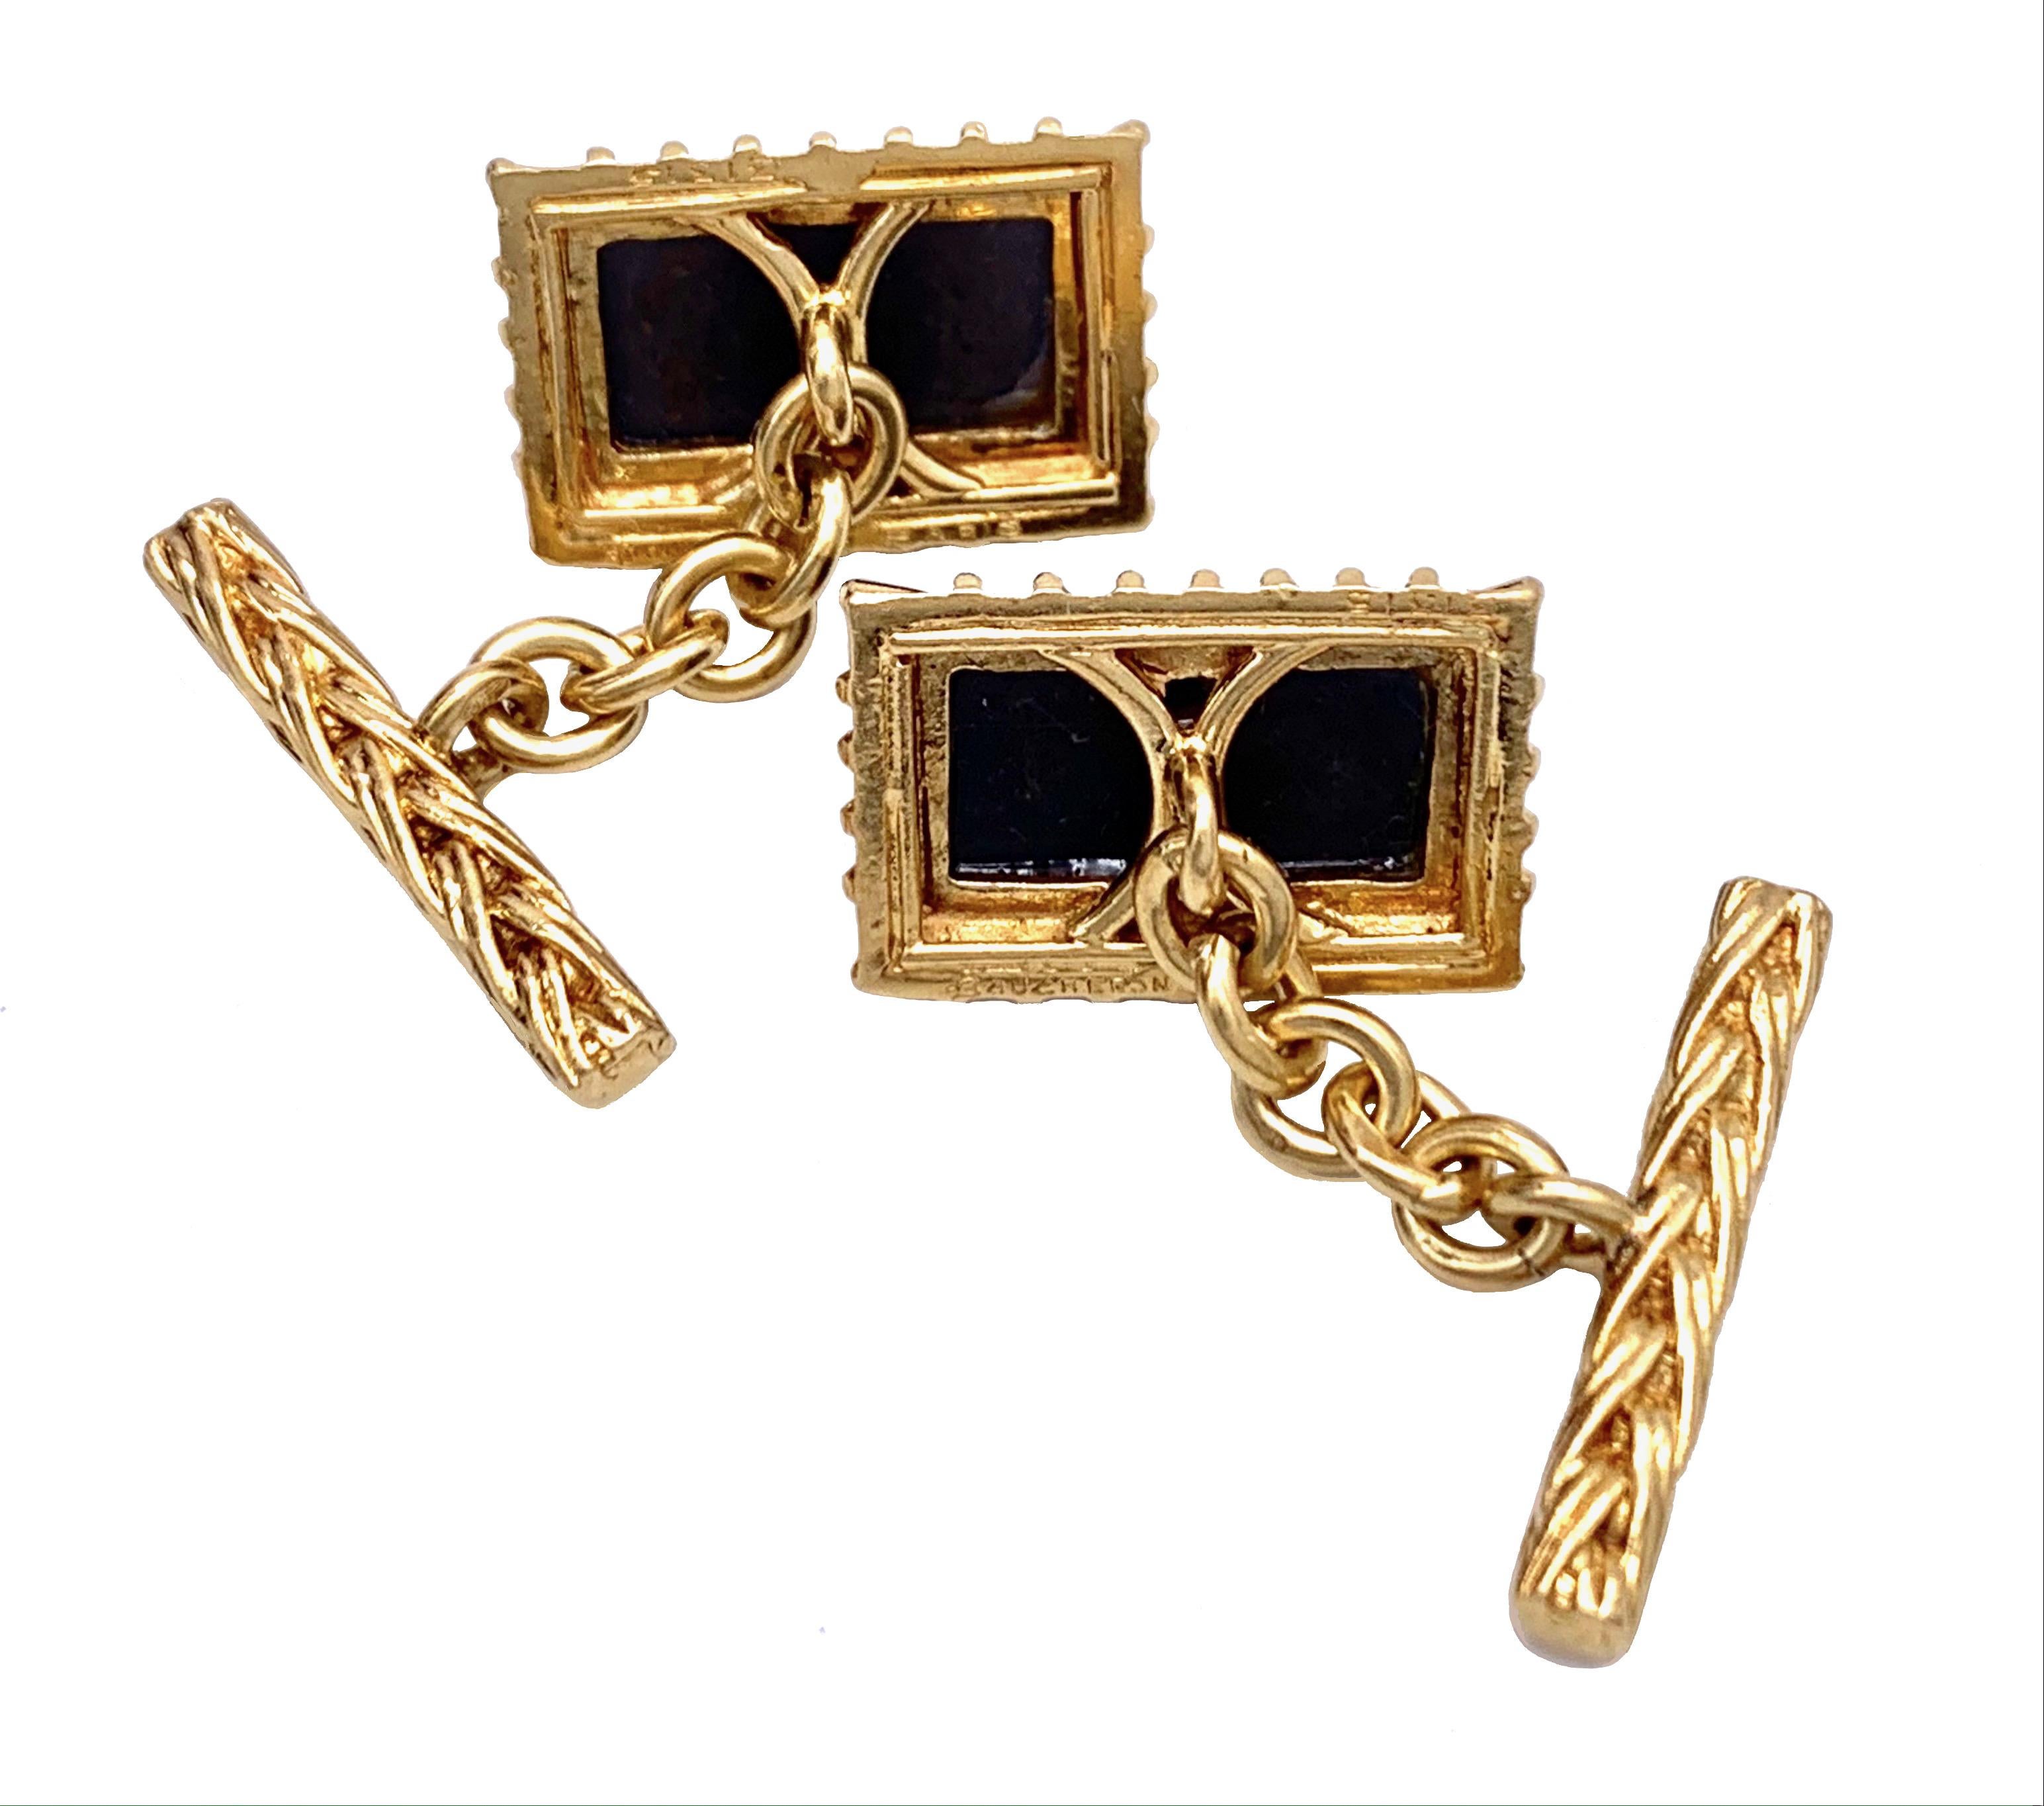 This elegant pair of cufflinks has been handcrafted by Boucheron Paris in the 1950's. The cufflinks have been worn and loved, the onyx batons show minute delicate chips.
